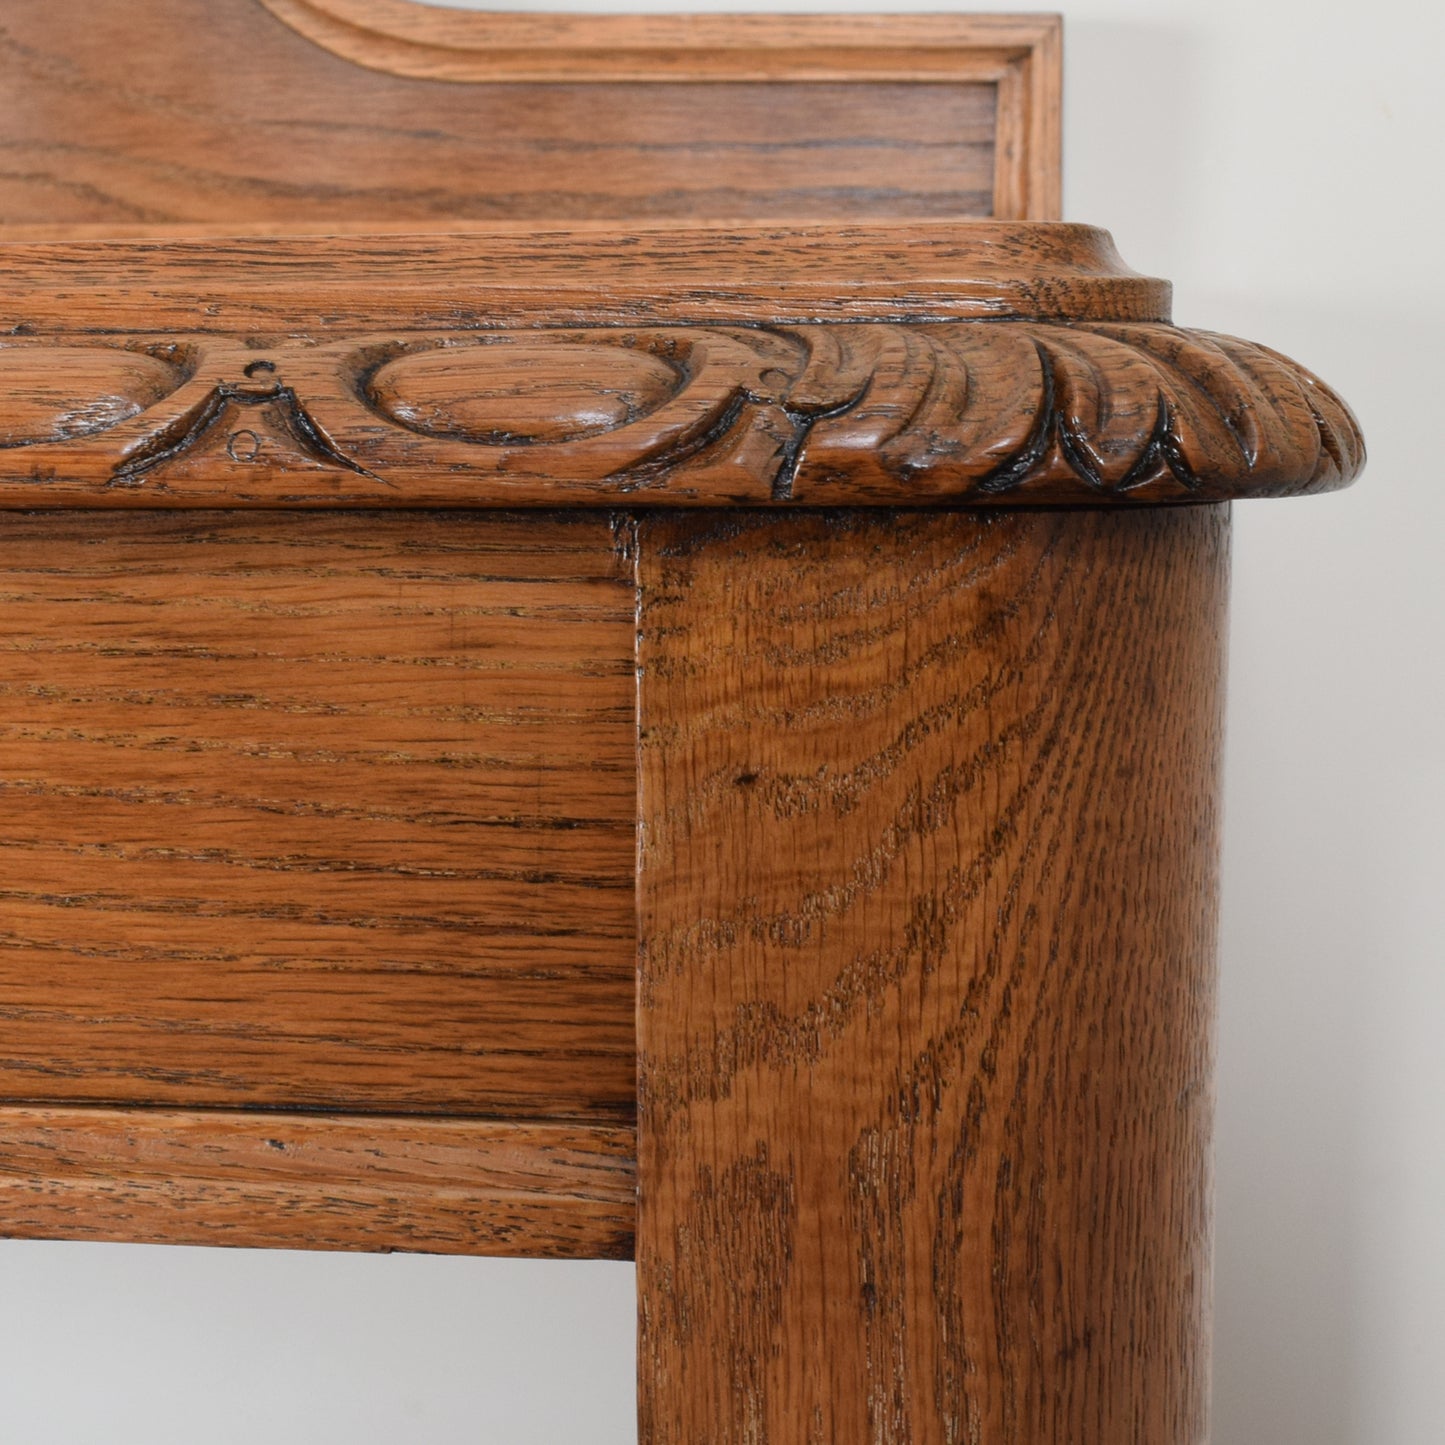 Carved Victorian Console Table